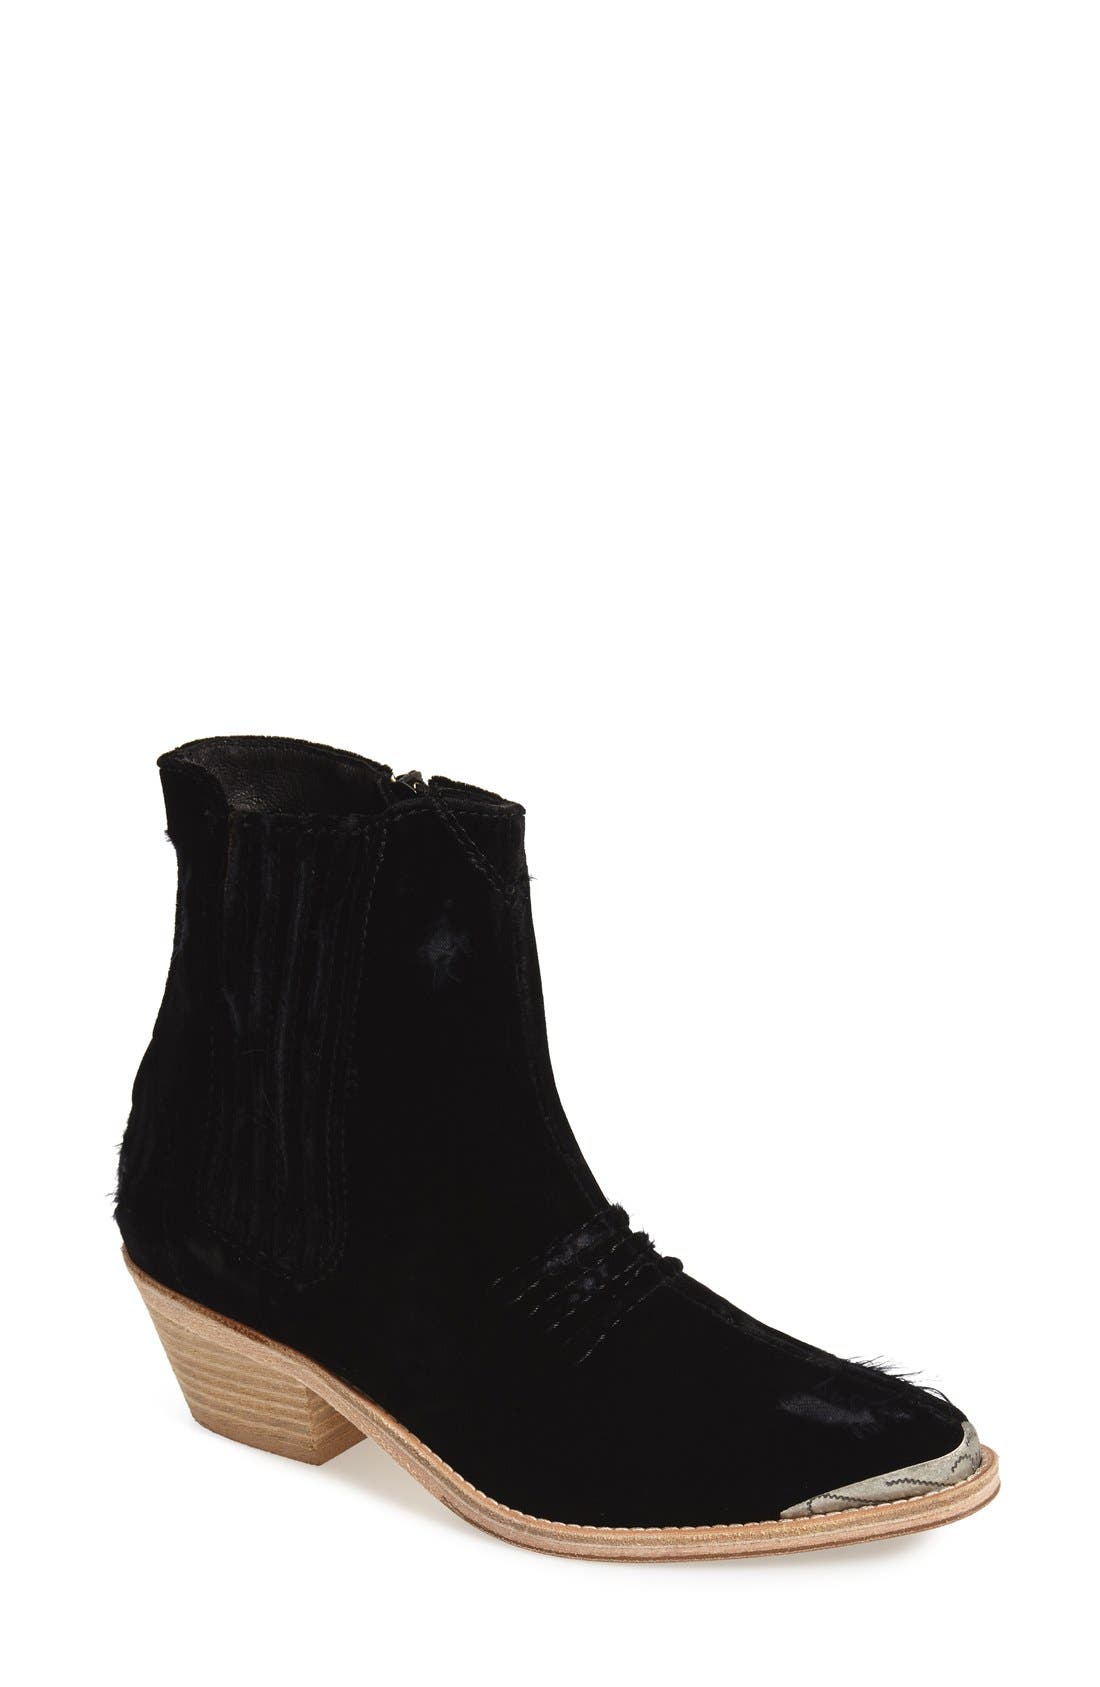 Free People 'Barbary' Velvet Ankle Boot 